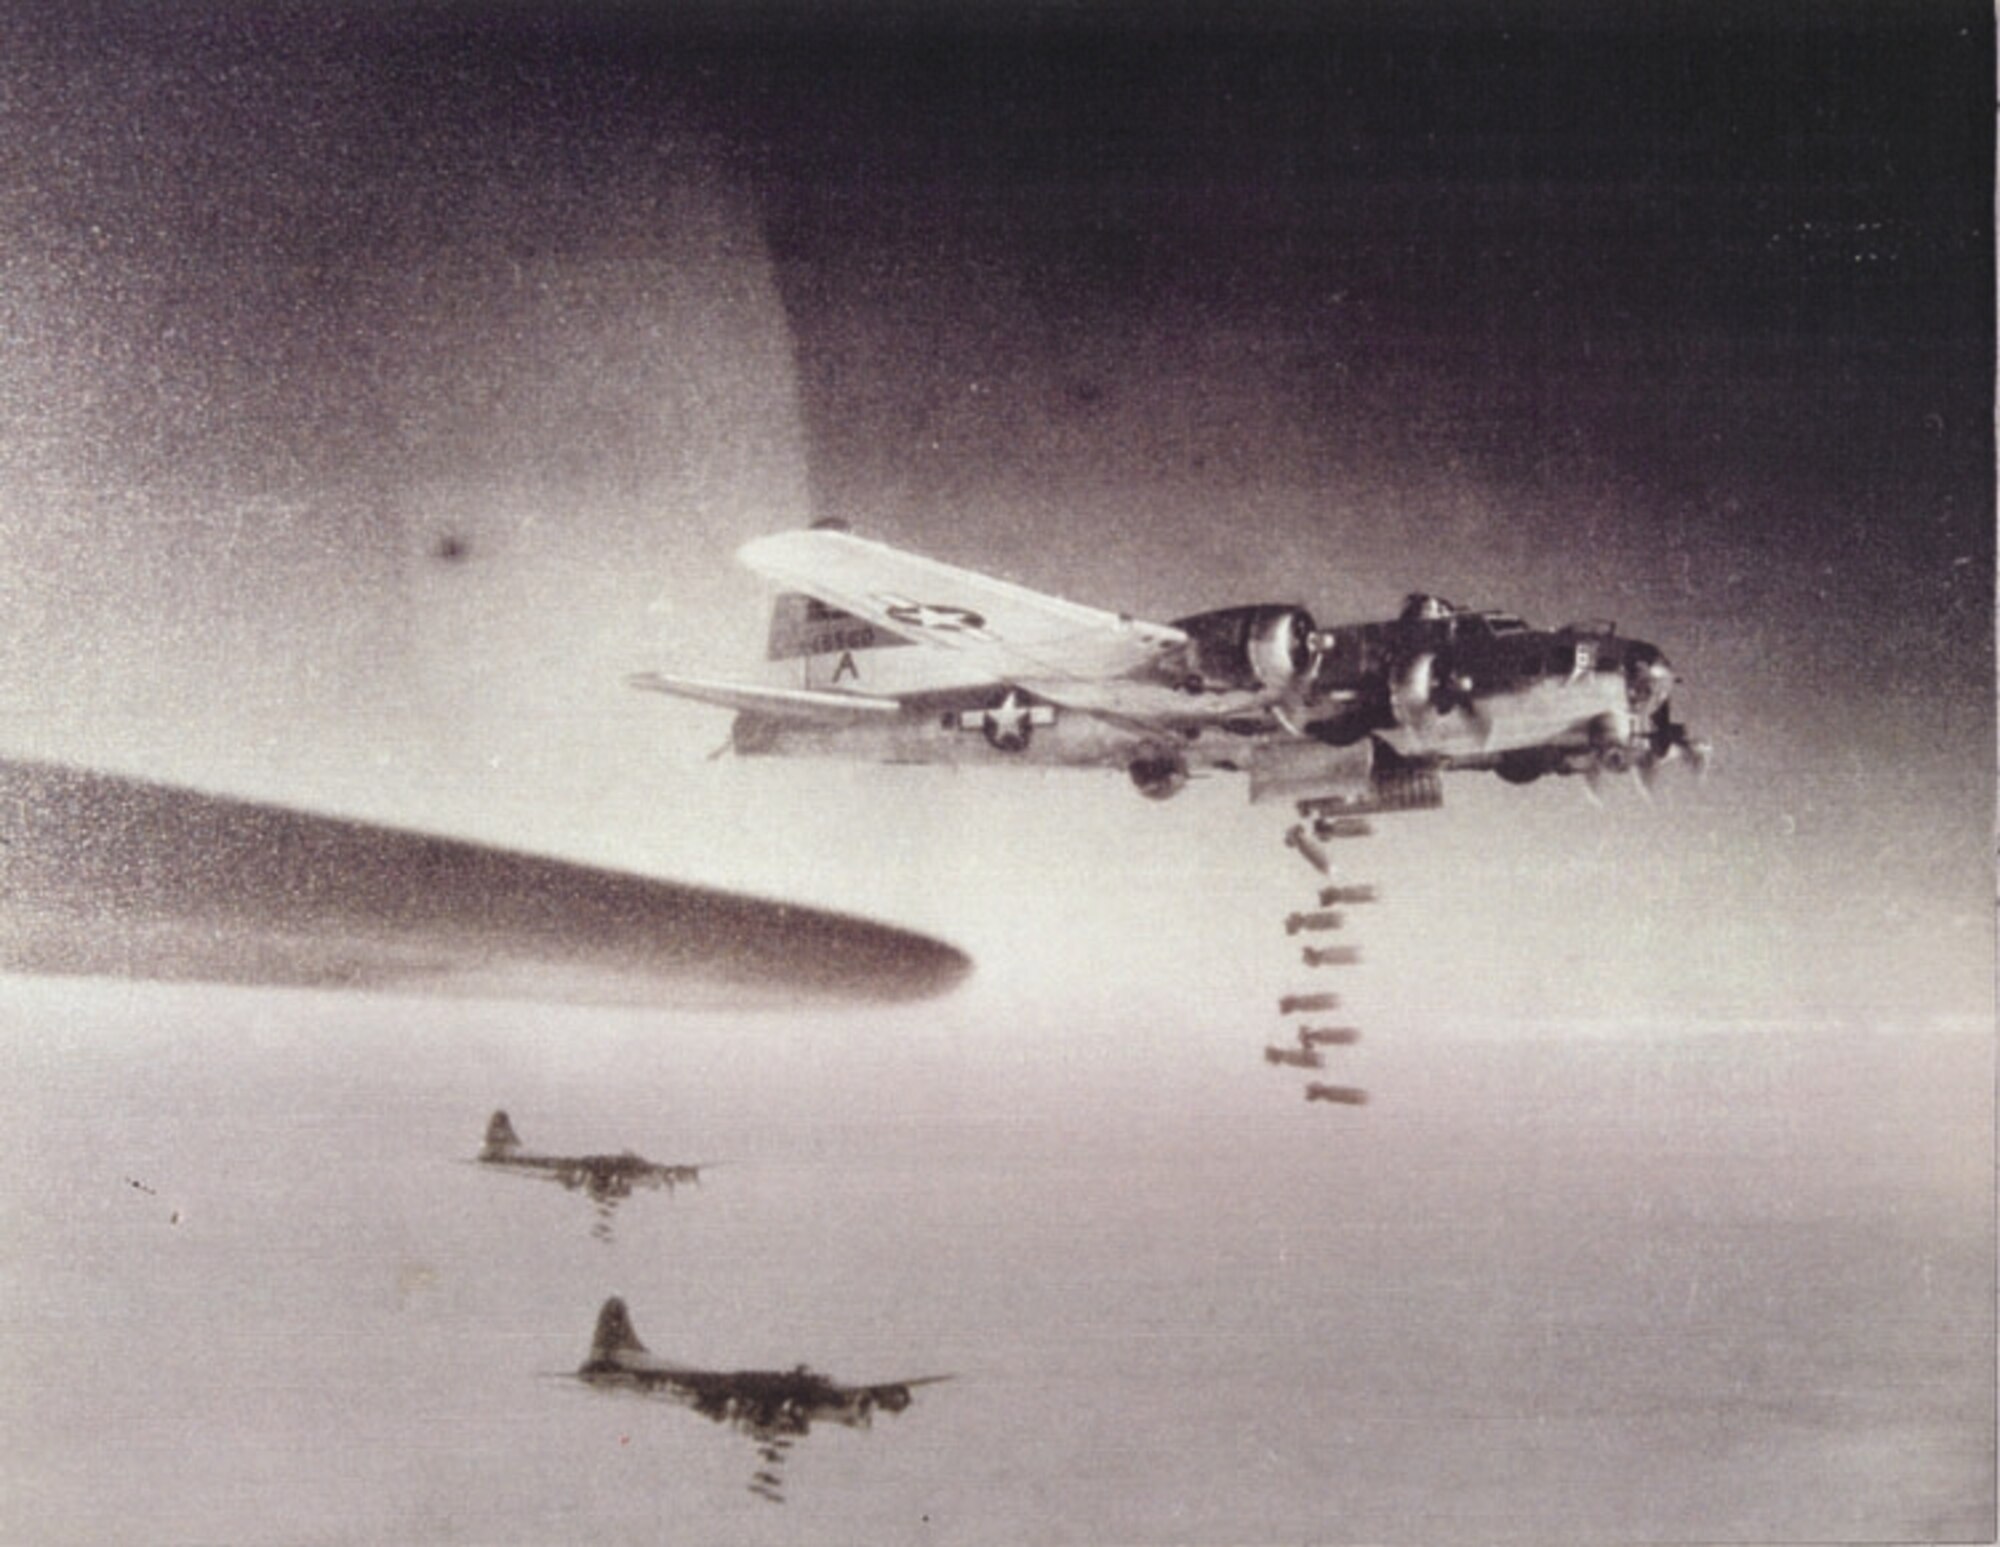 B-17s drop bombs over occupied Europe. (U.S. Army Air Corps photo by Harvey Shaw)